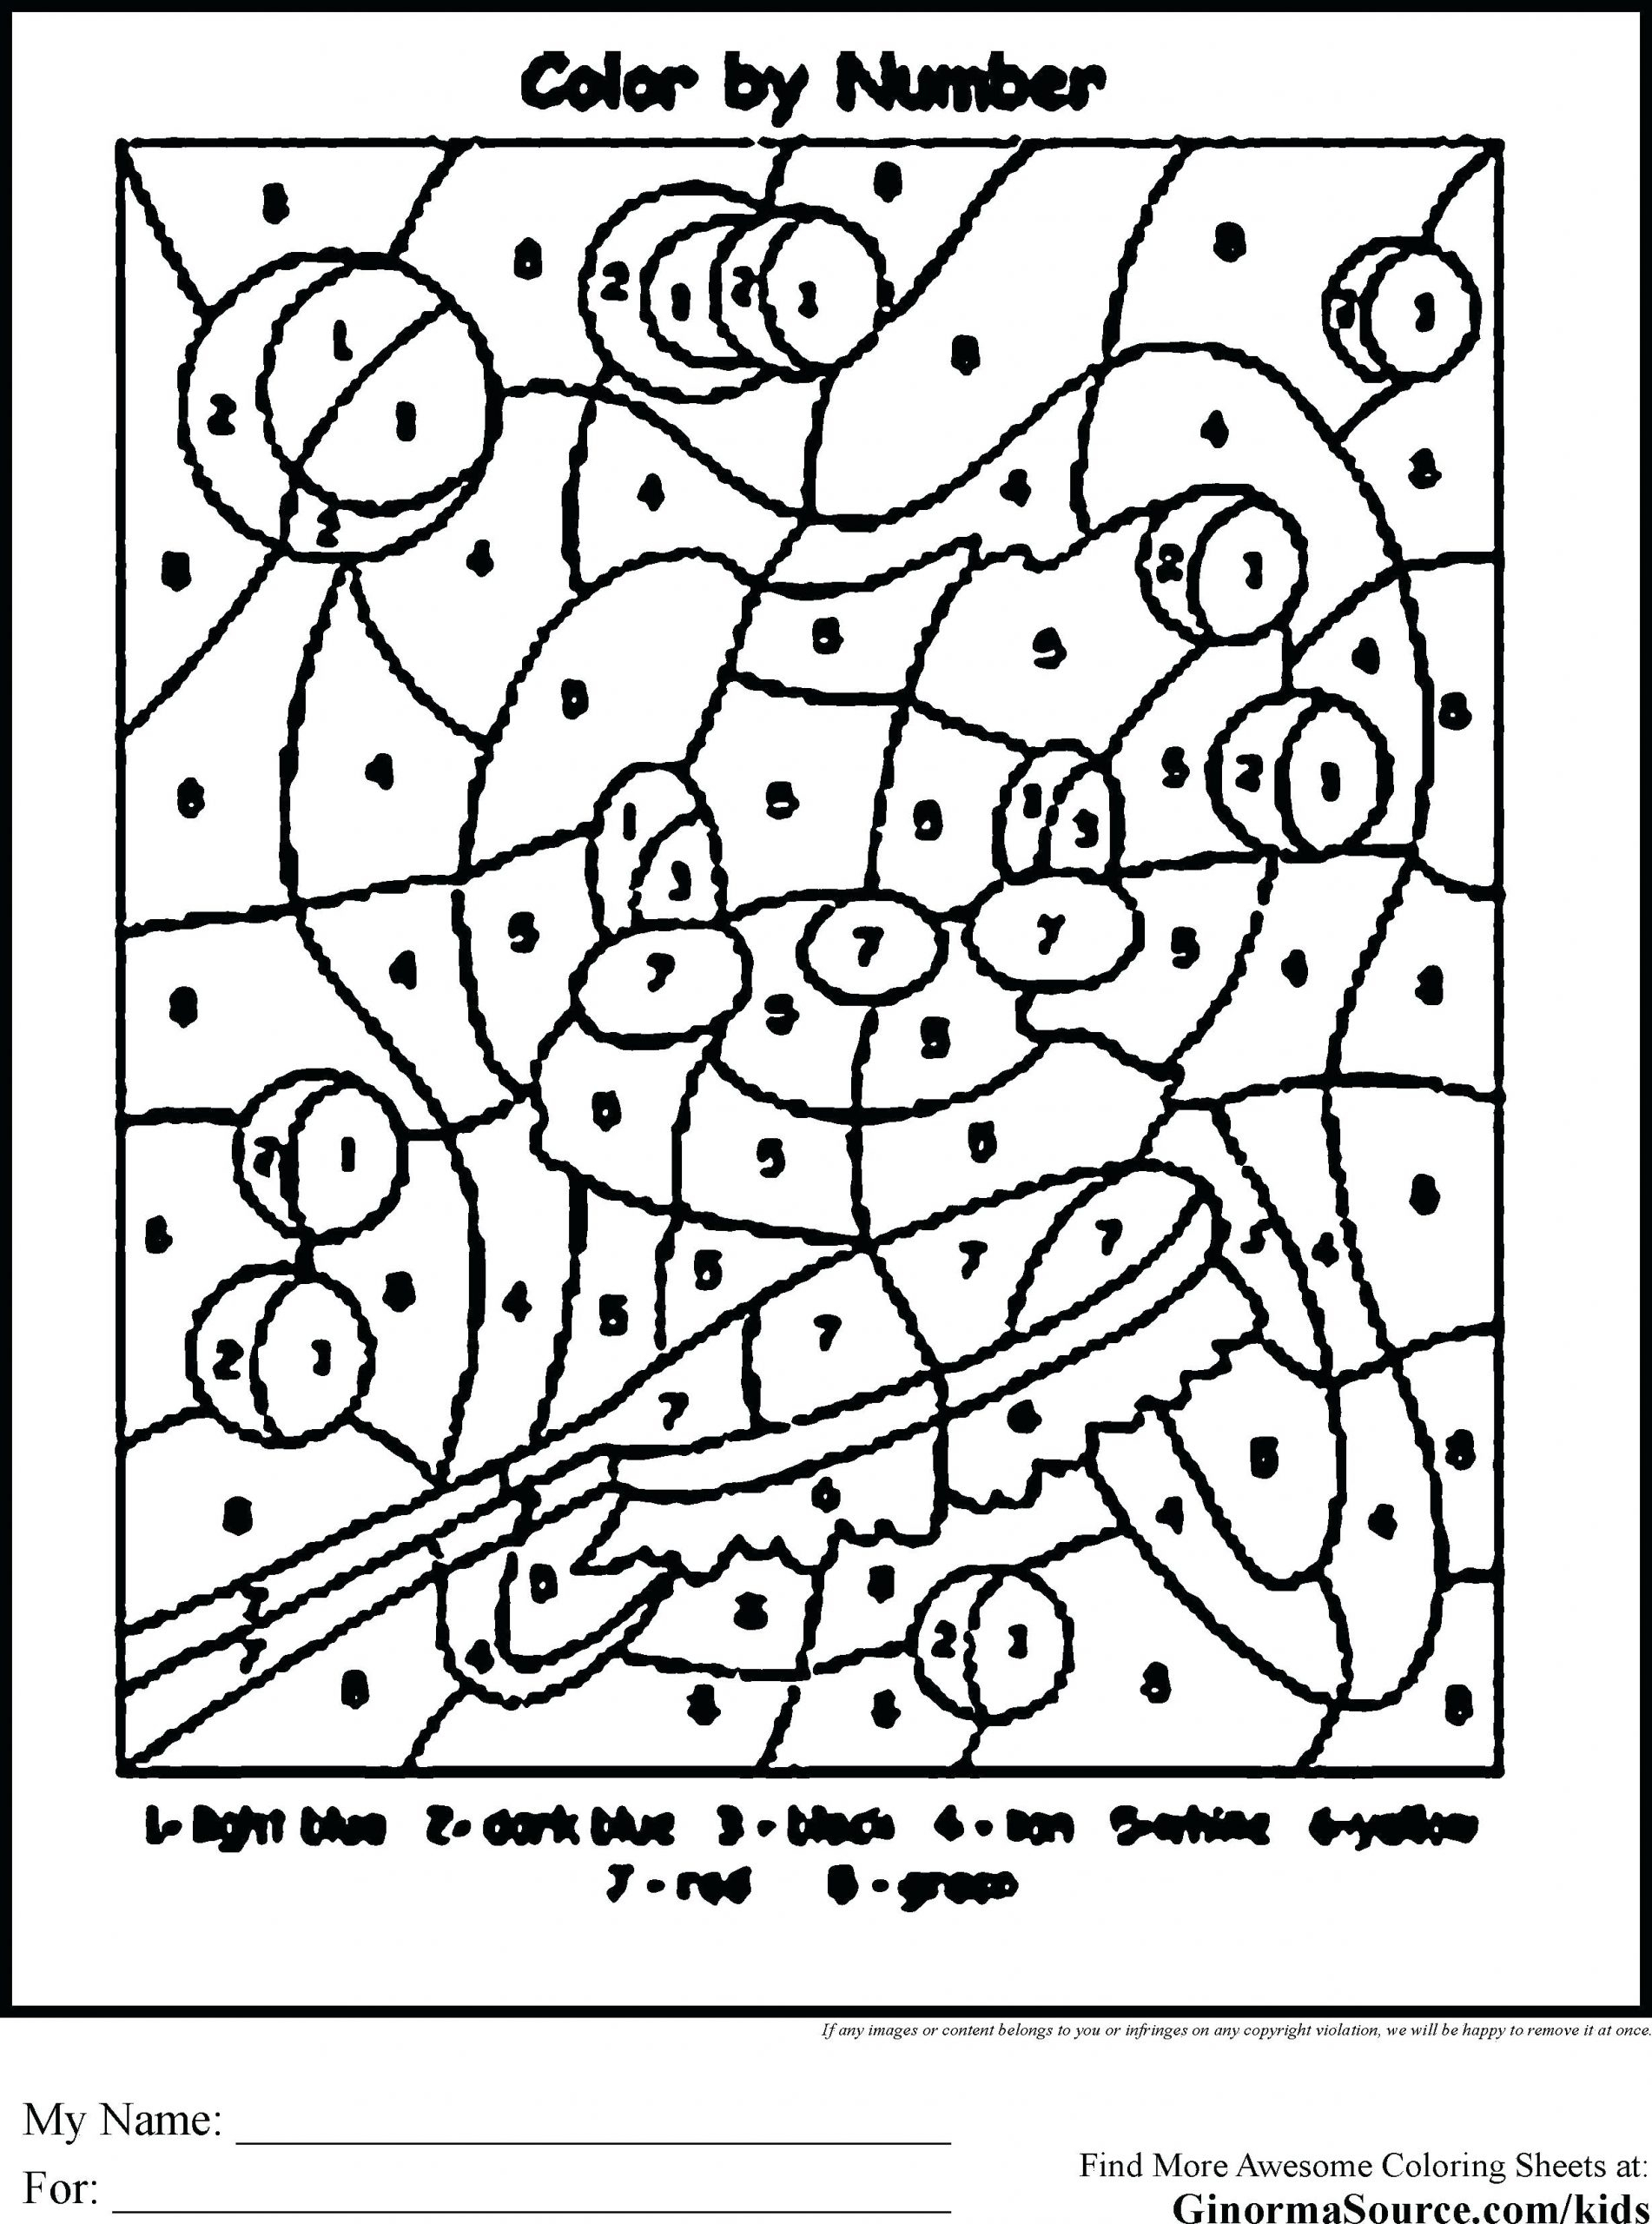 Coloring Pages : Coloring Multiplication Worksheets Free with regard to Printable Multiplication Worksheets Color By Number